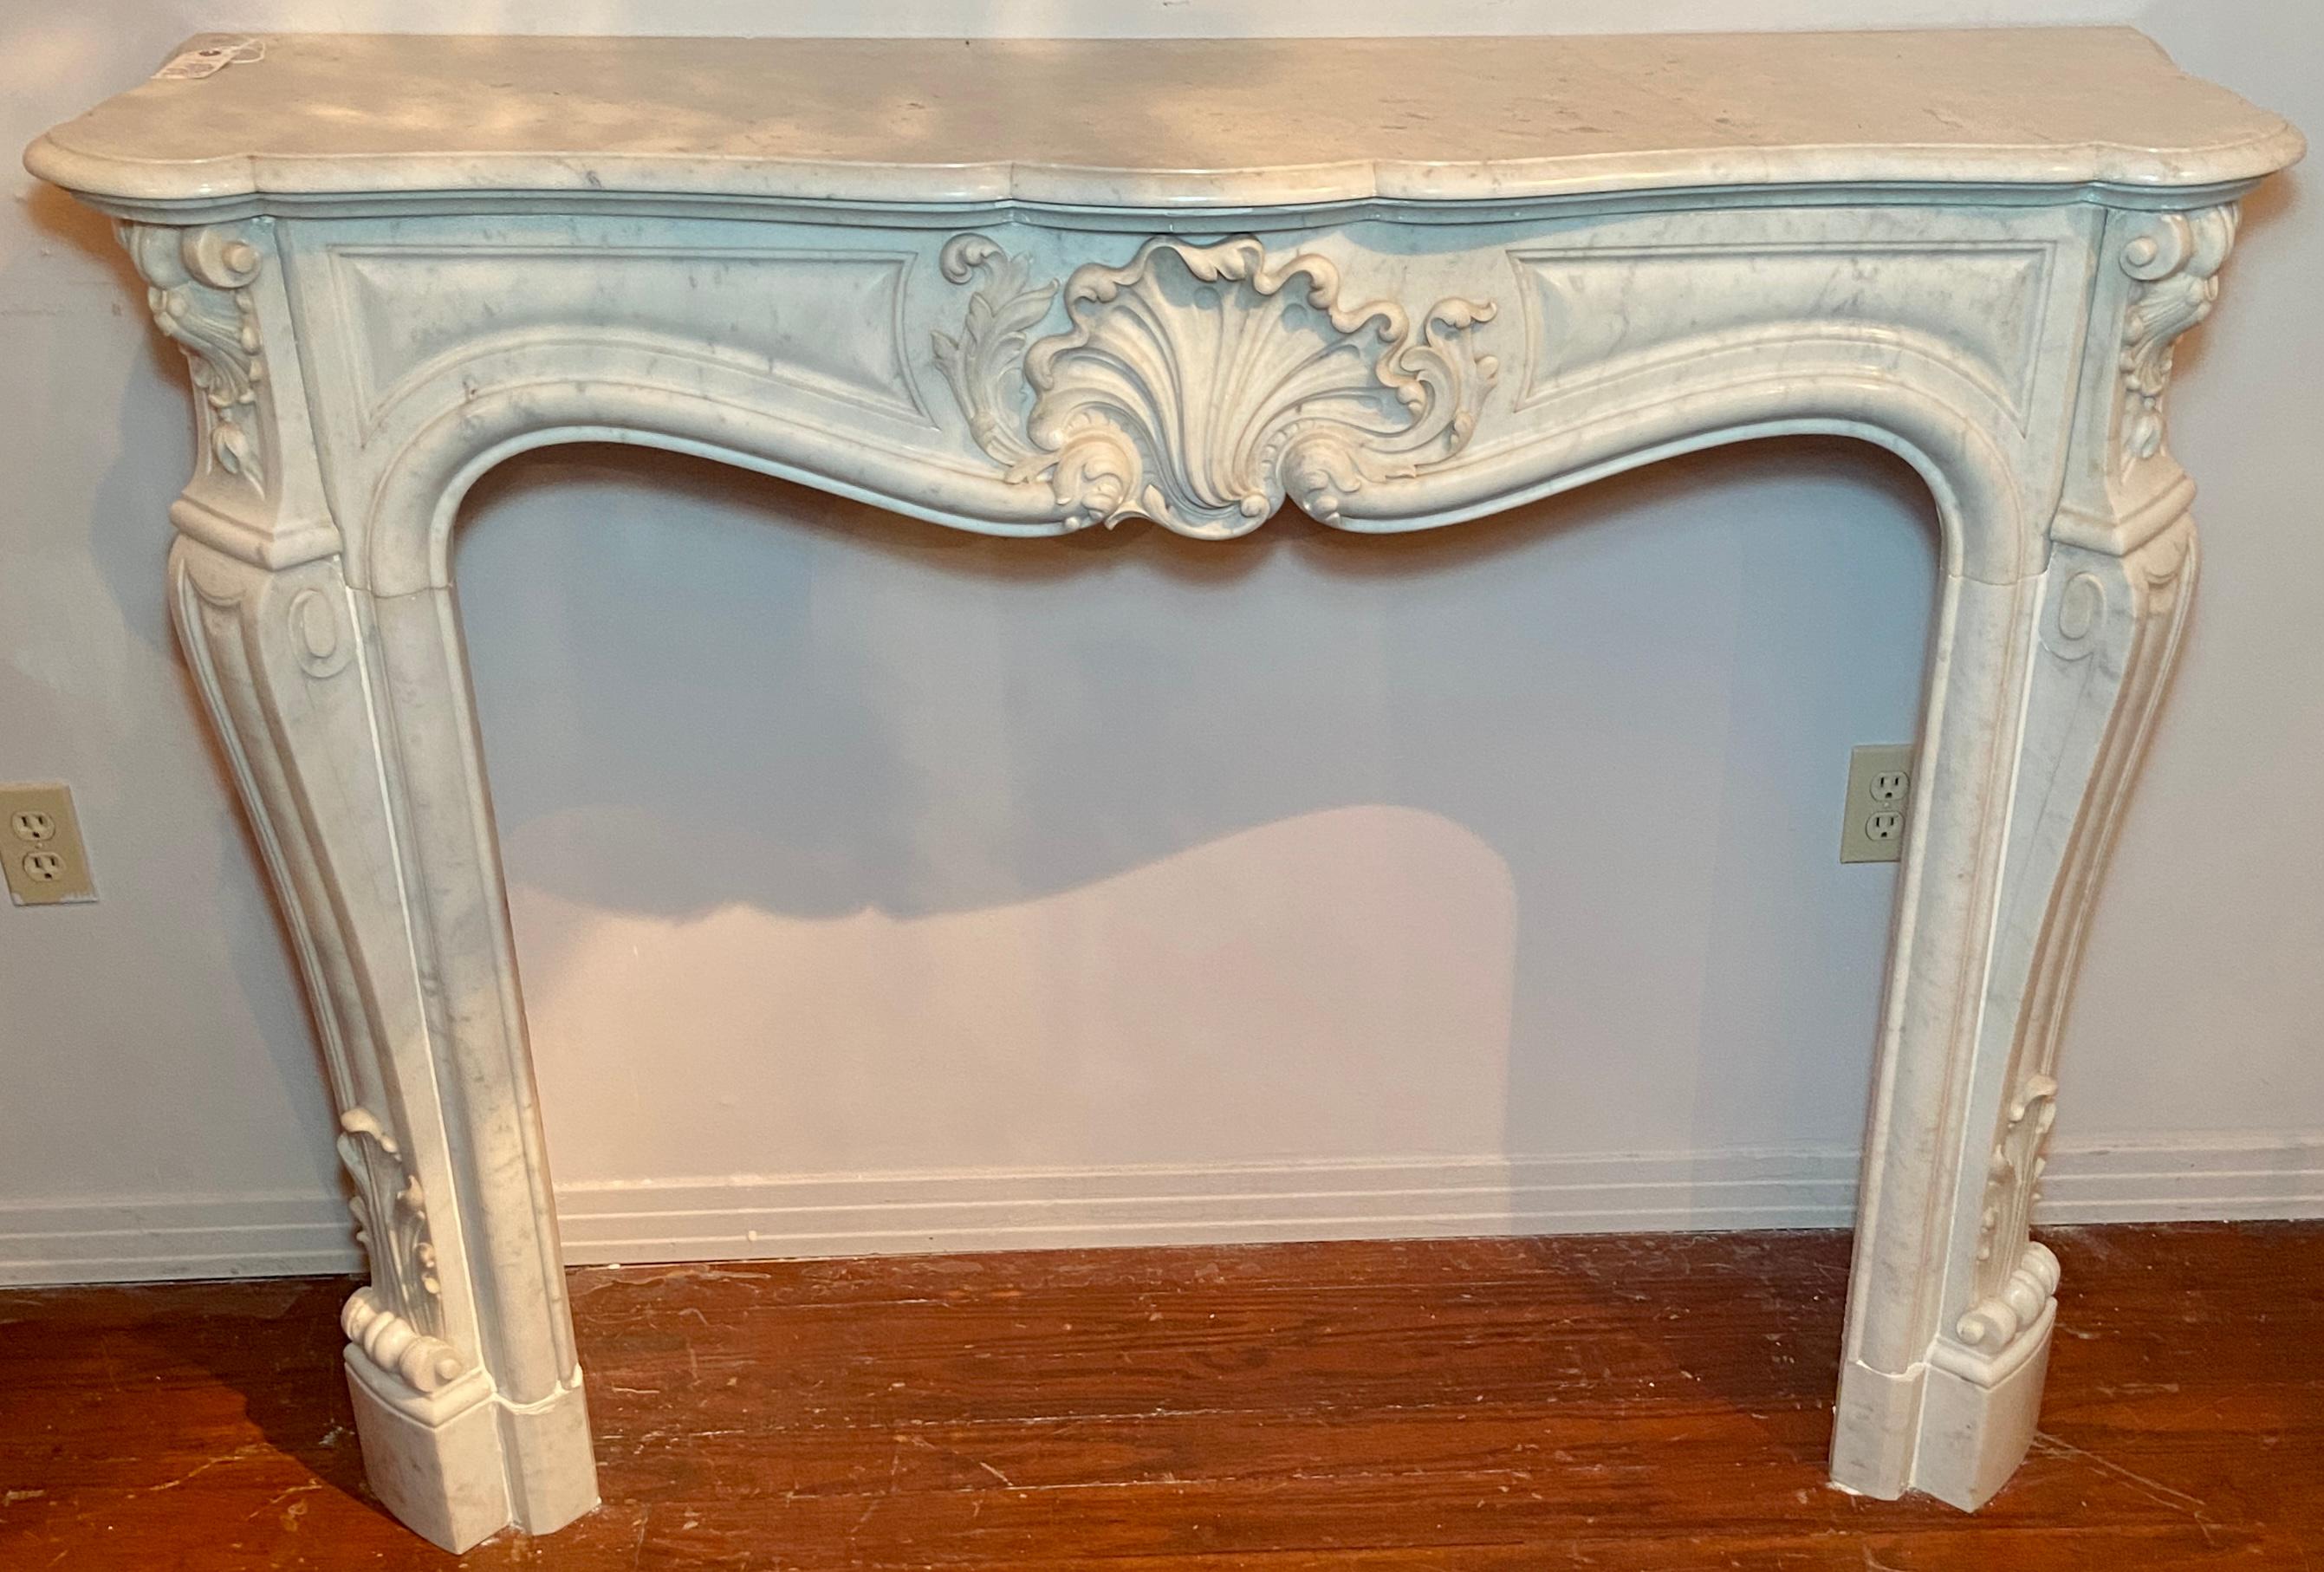 Antique French Louis XV white and grey marble mantel, Circa 1860-1880.